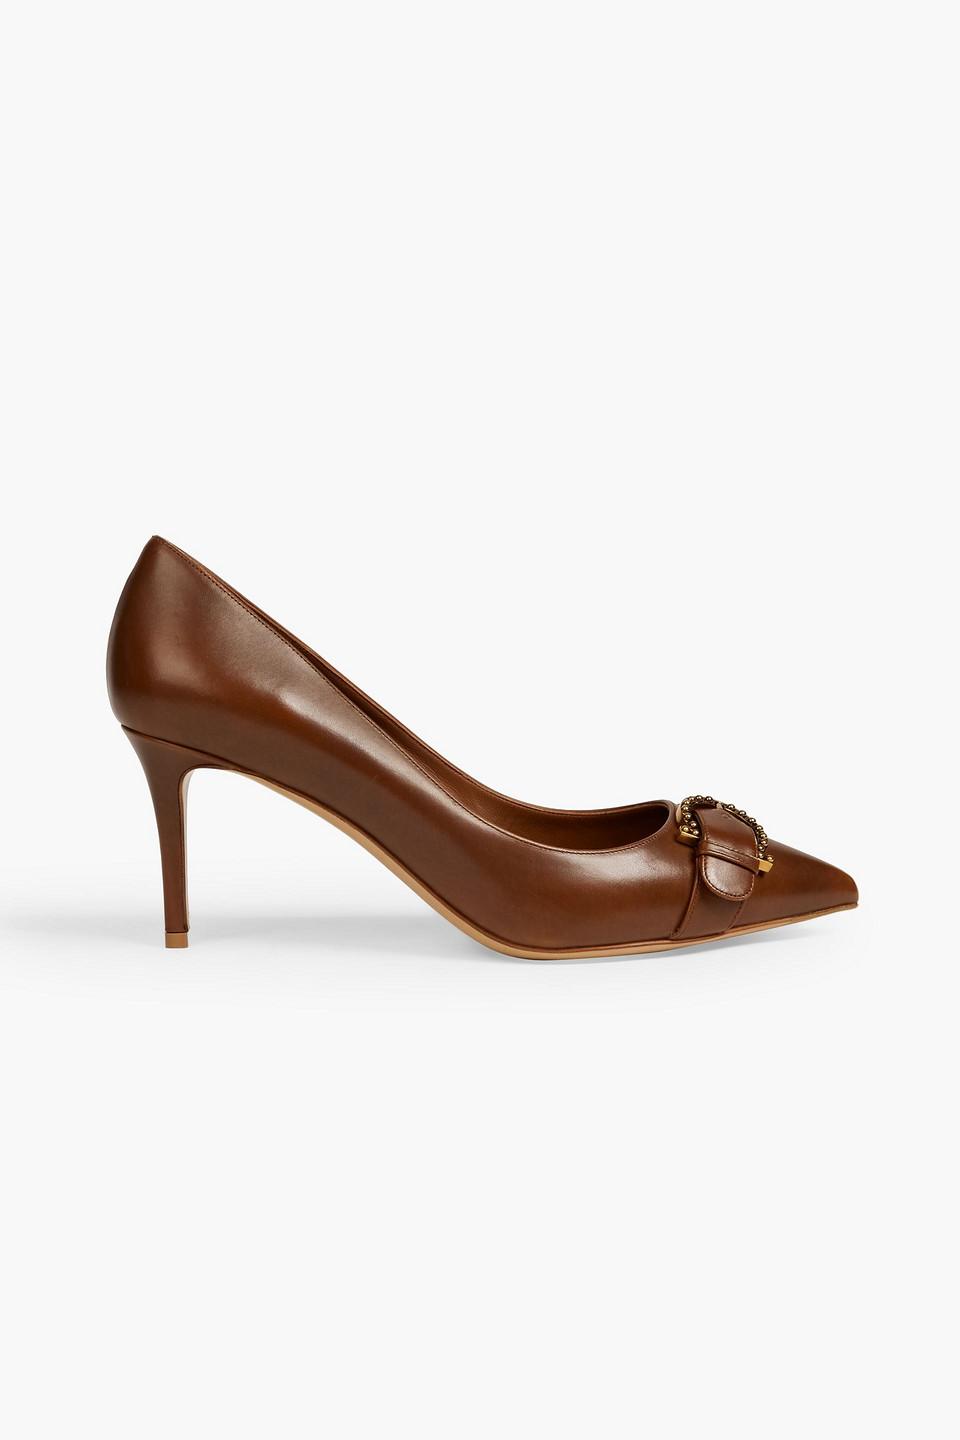 Ferragamo Airola Buckle-embellished Leather Pumps in Brown | Lyst